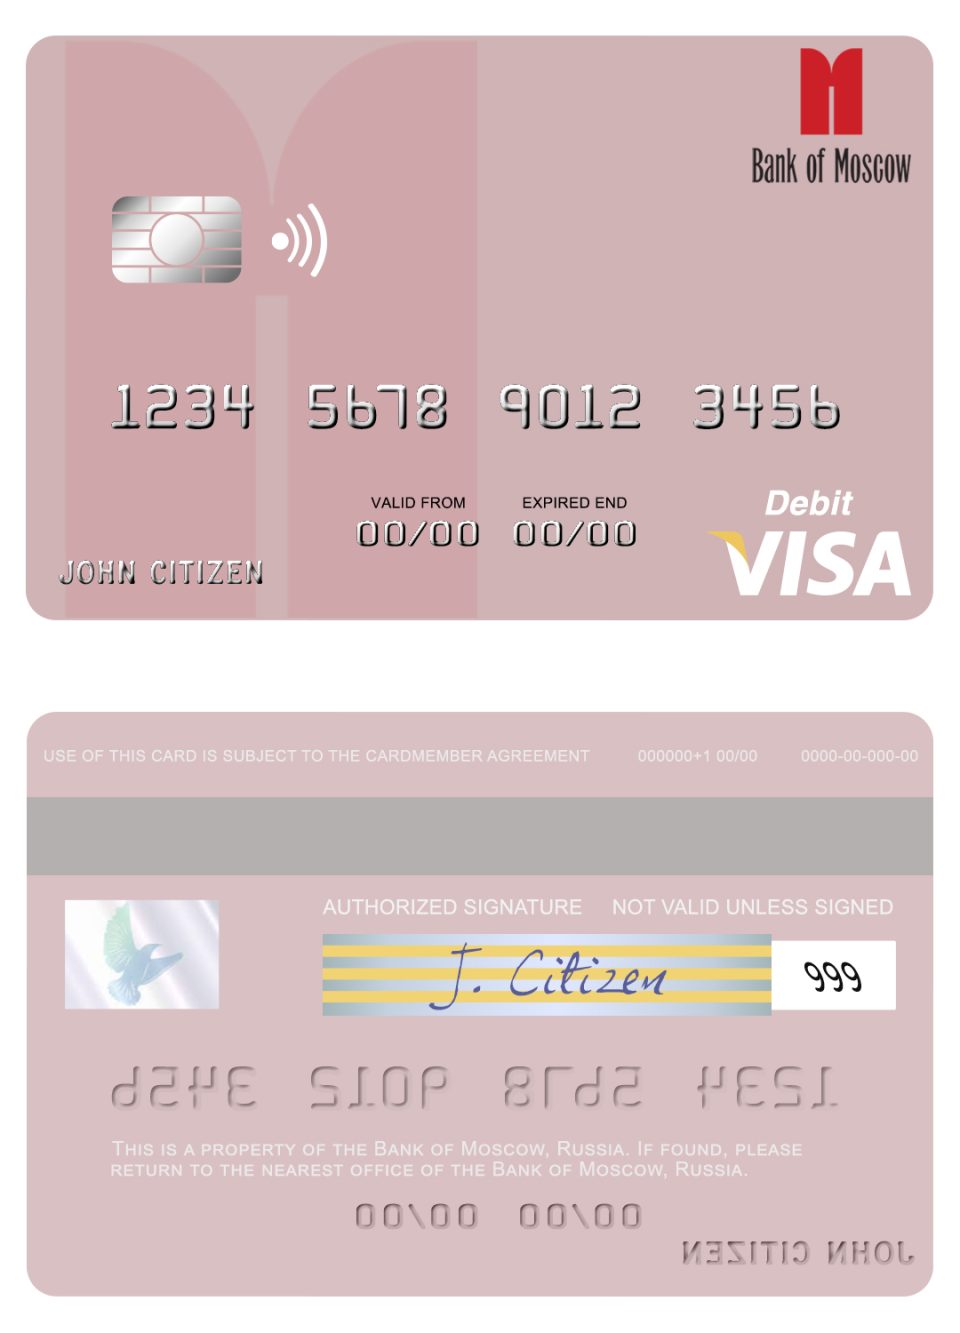 Editable Russia Bank of Moscow visa debit card Templates in PSD Format